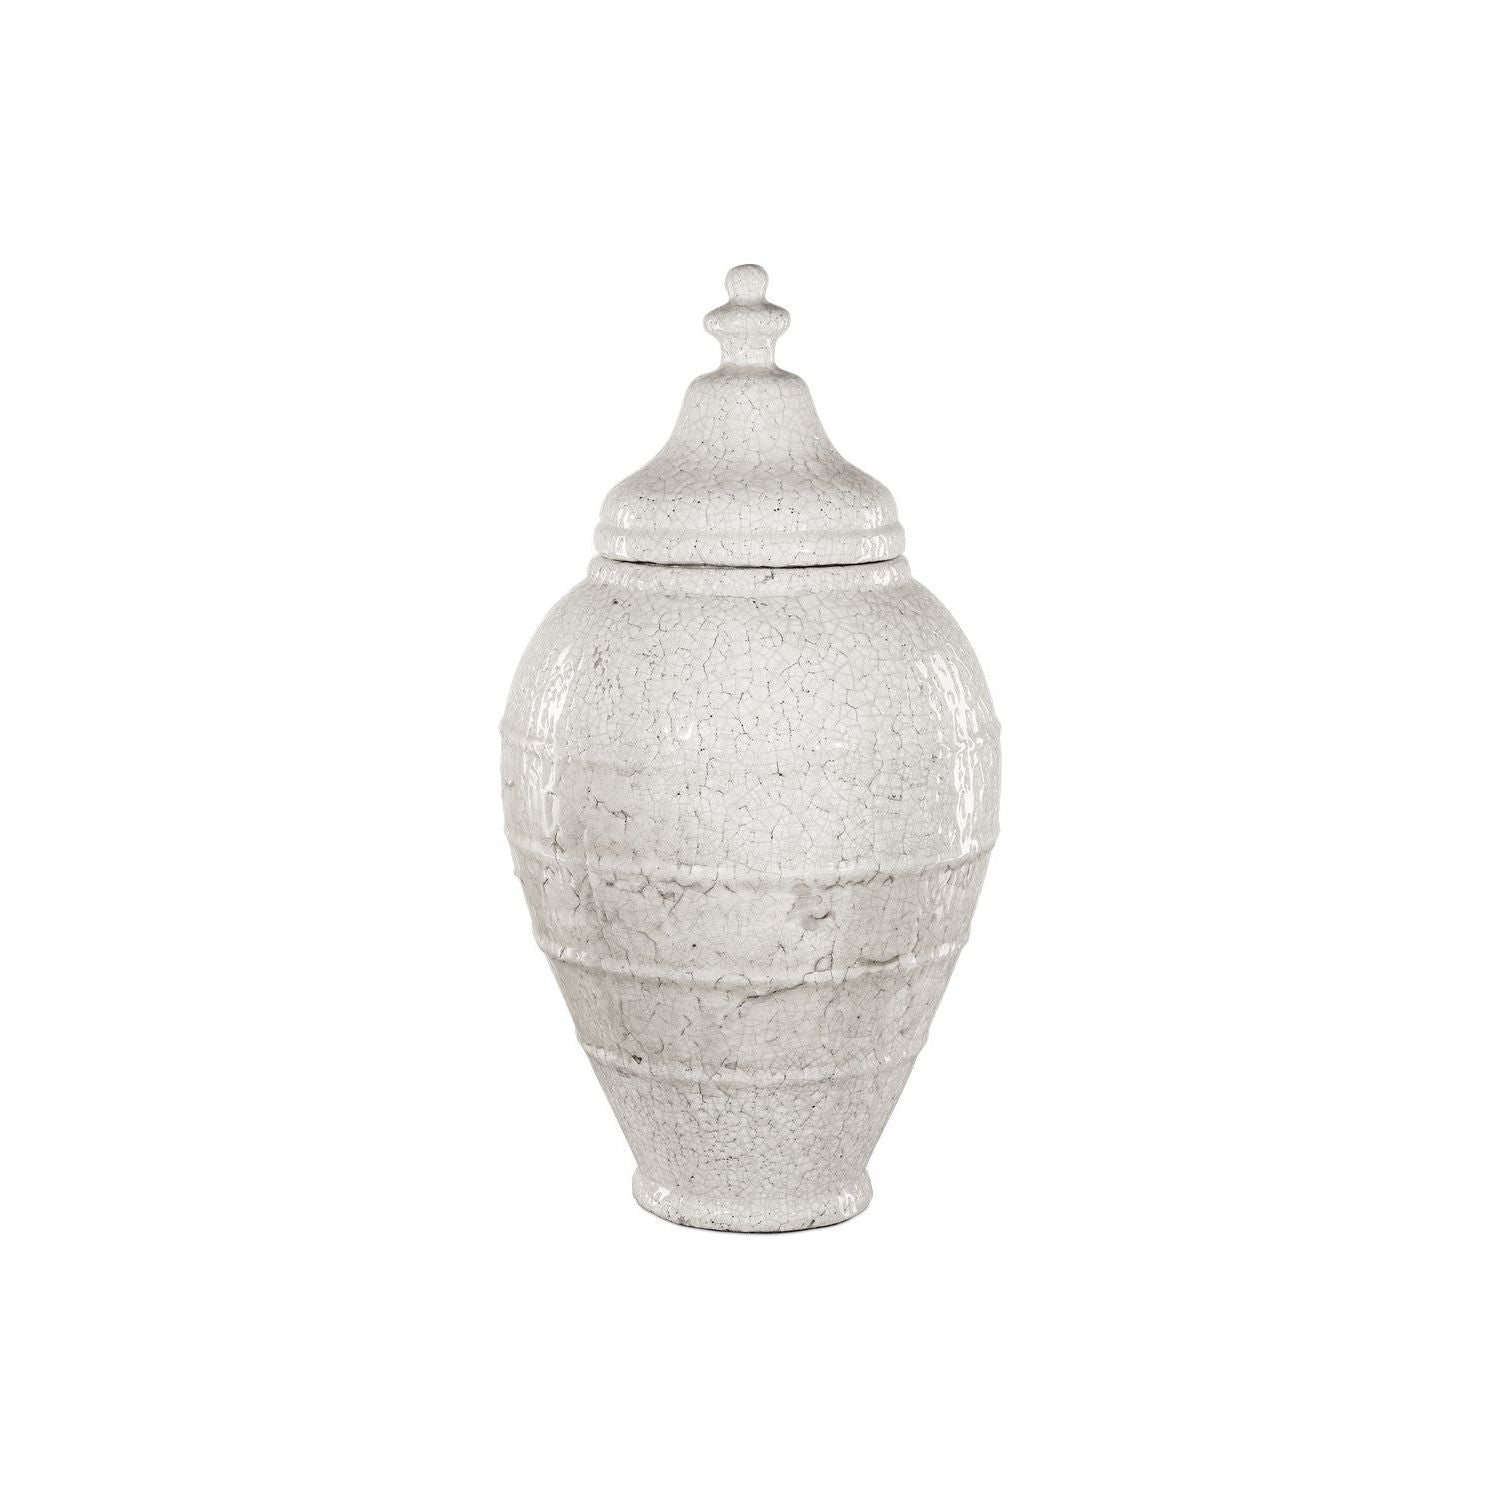 Currey and Company - 1200-0883 - Jar - Antique White